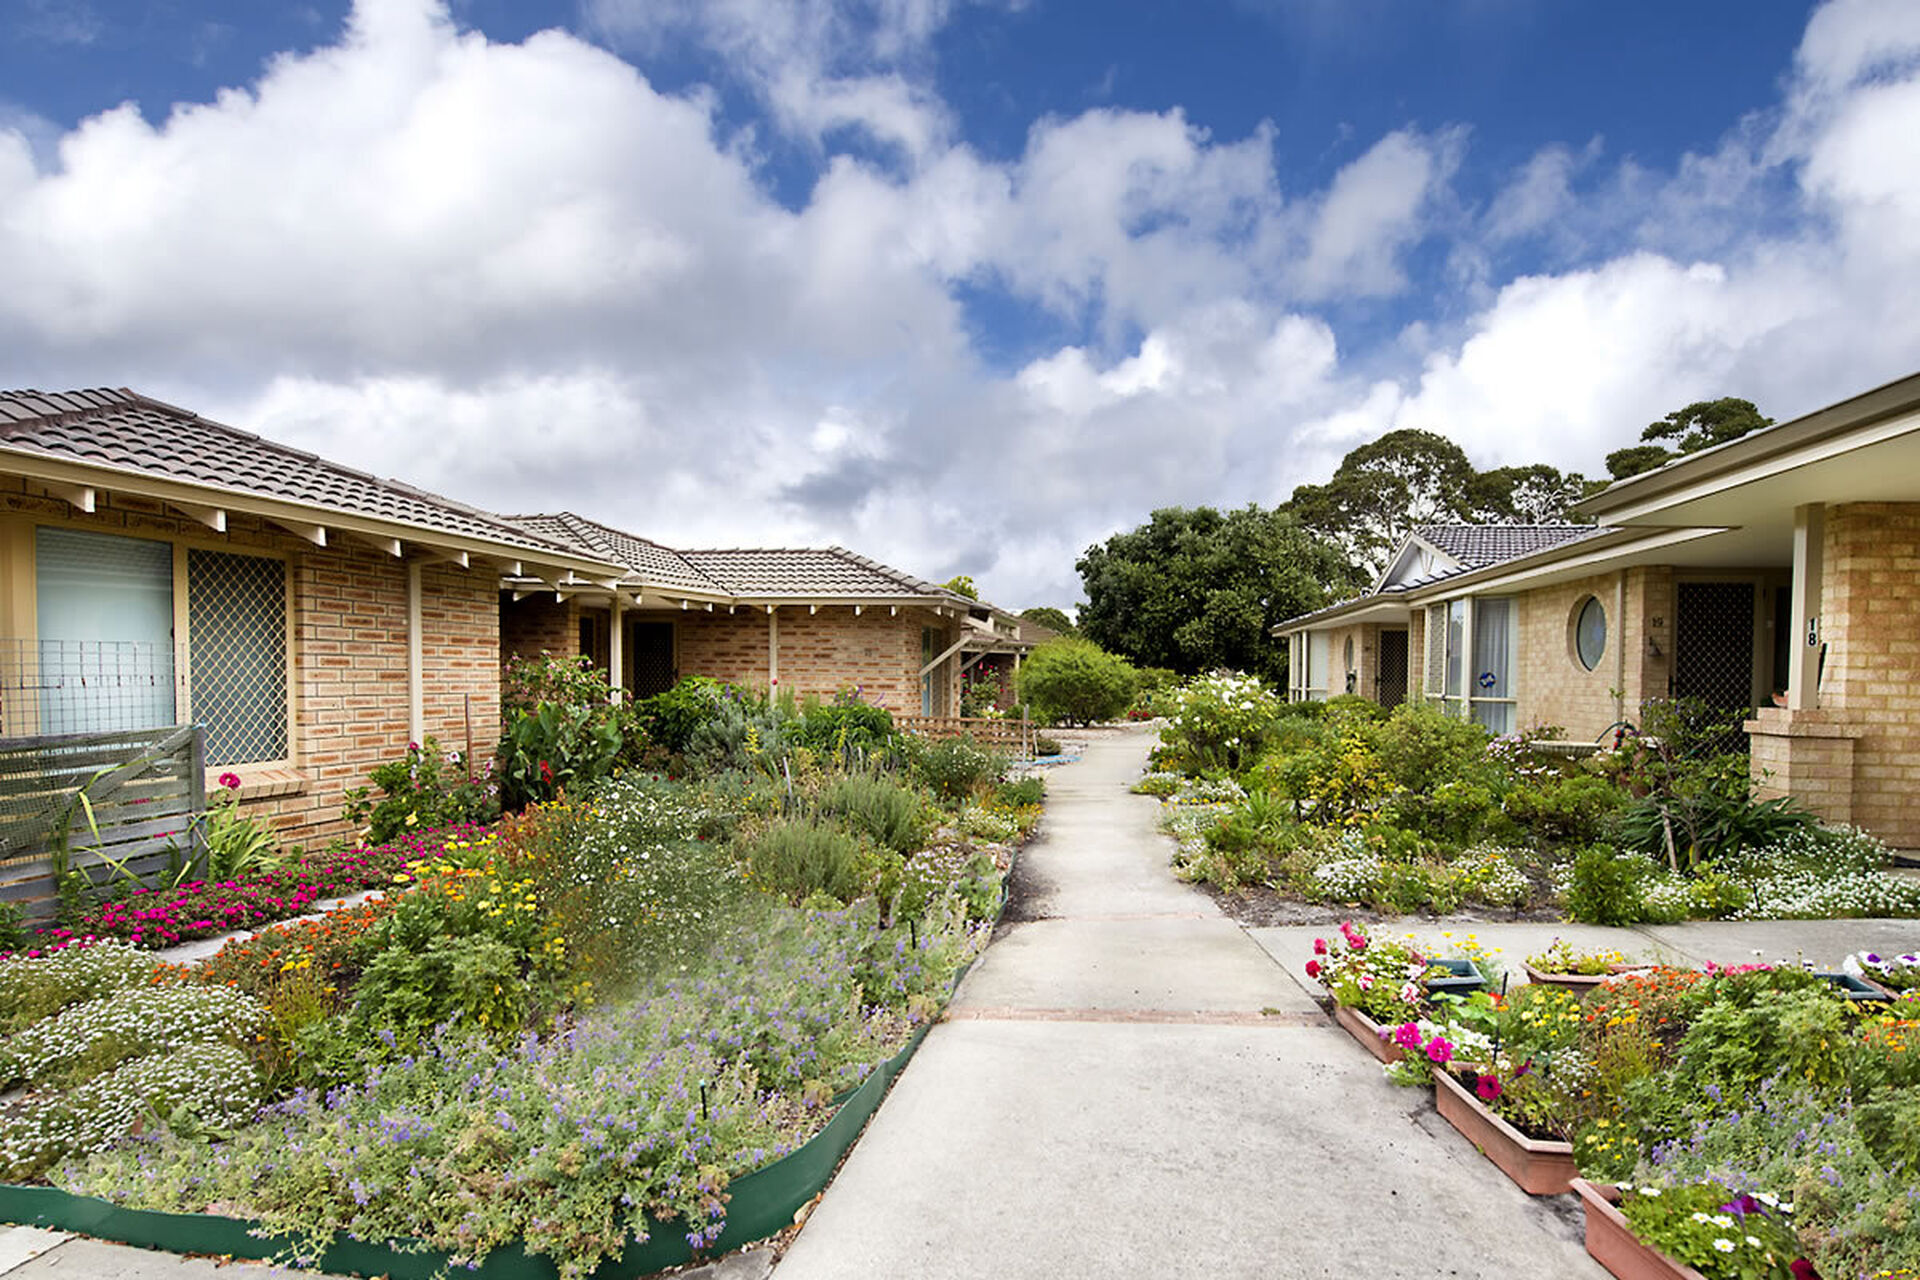 baptistcare bethel retirement village in albany wa for over 55s